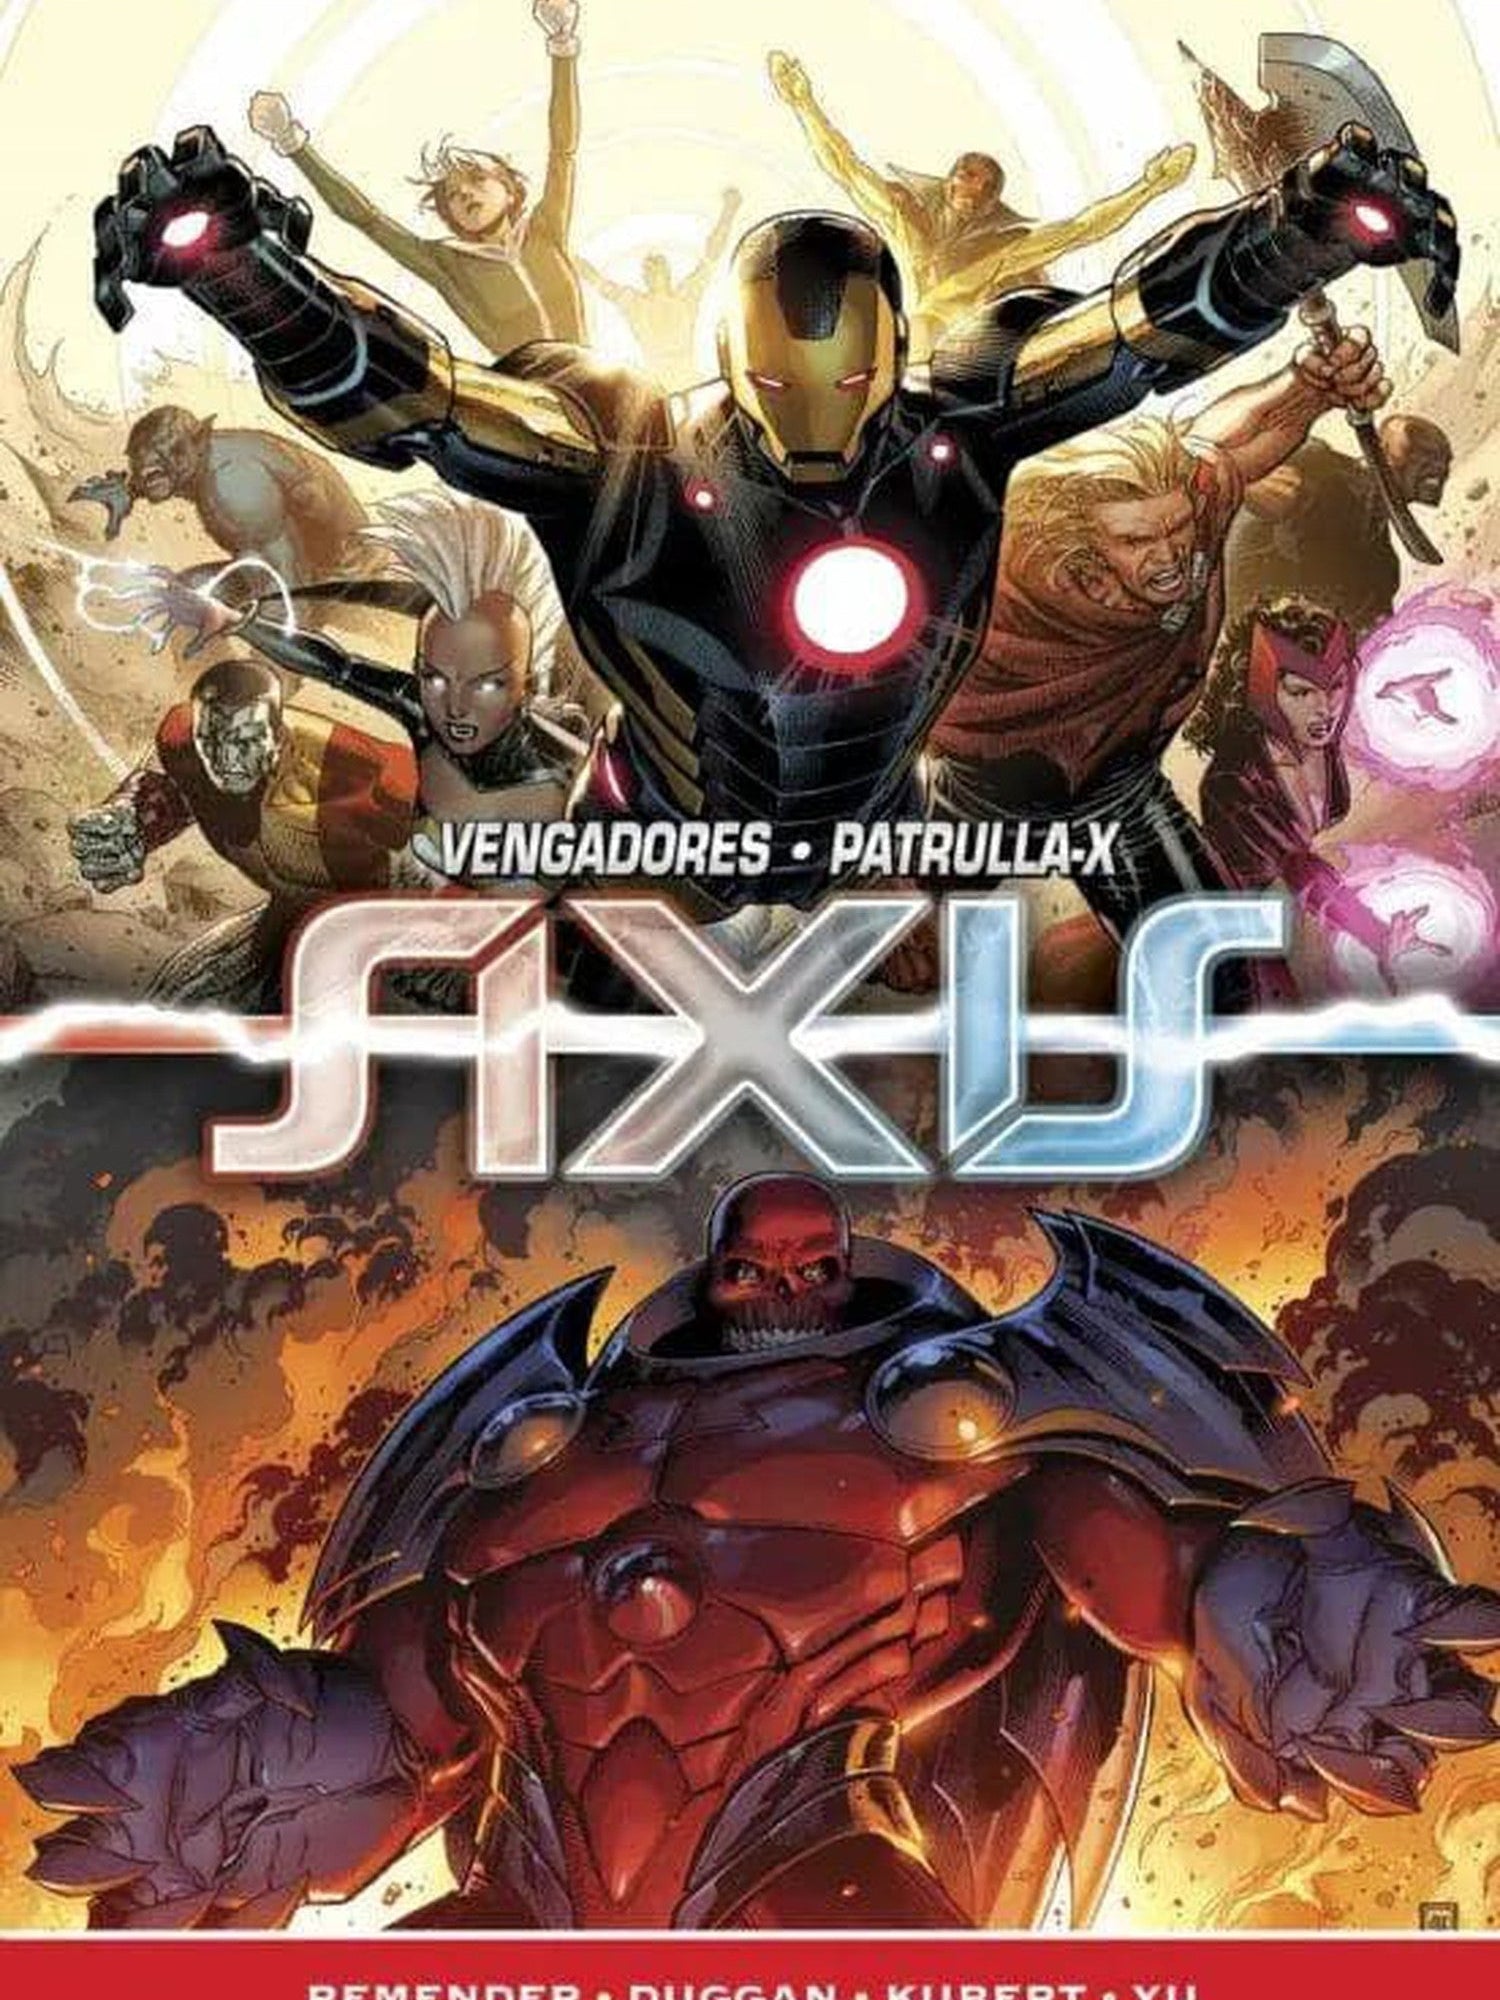 Marvel Now! Deluxe. Imposibles Vengadores 3: Axis